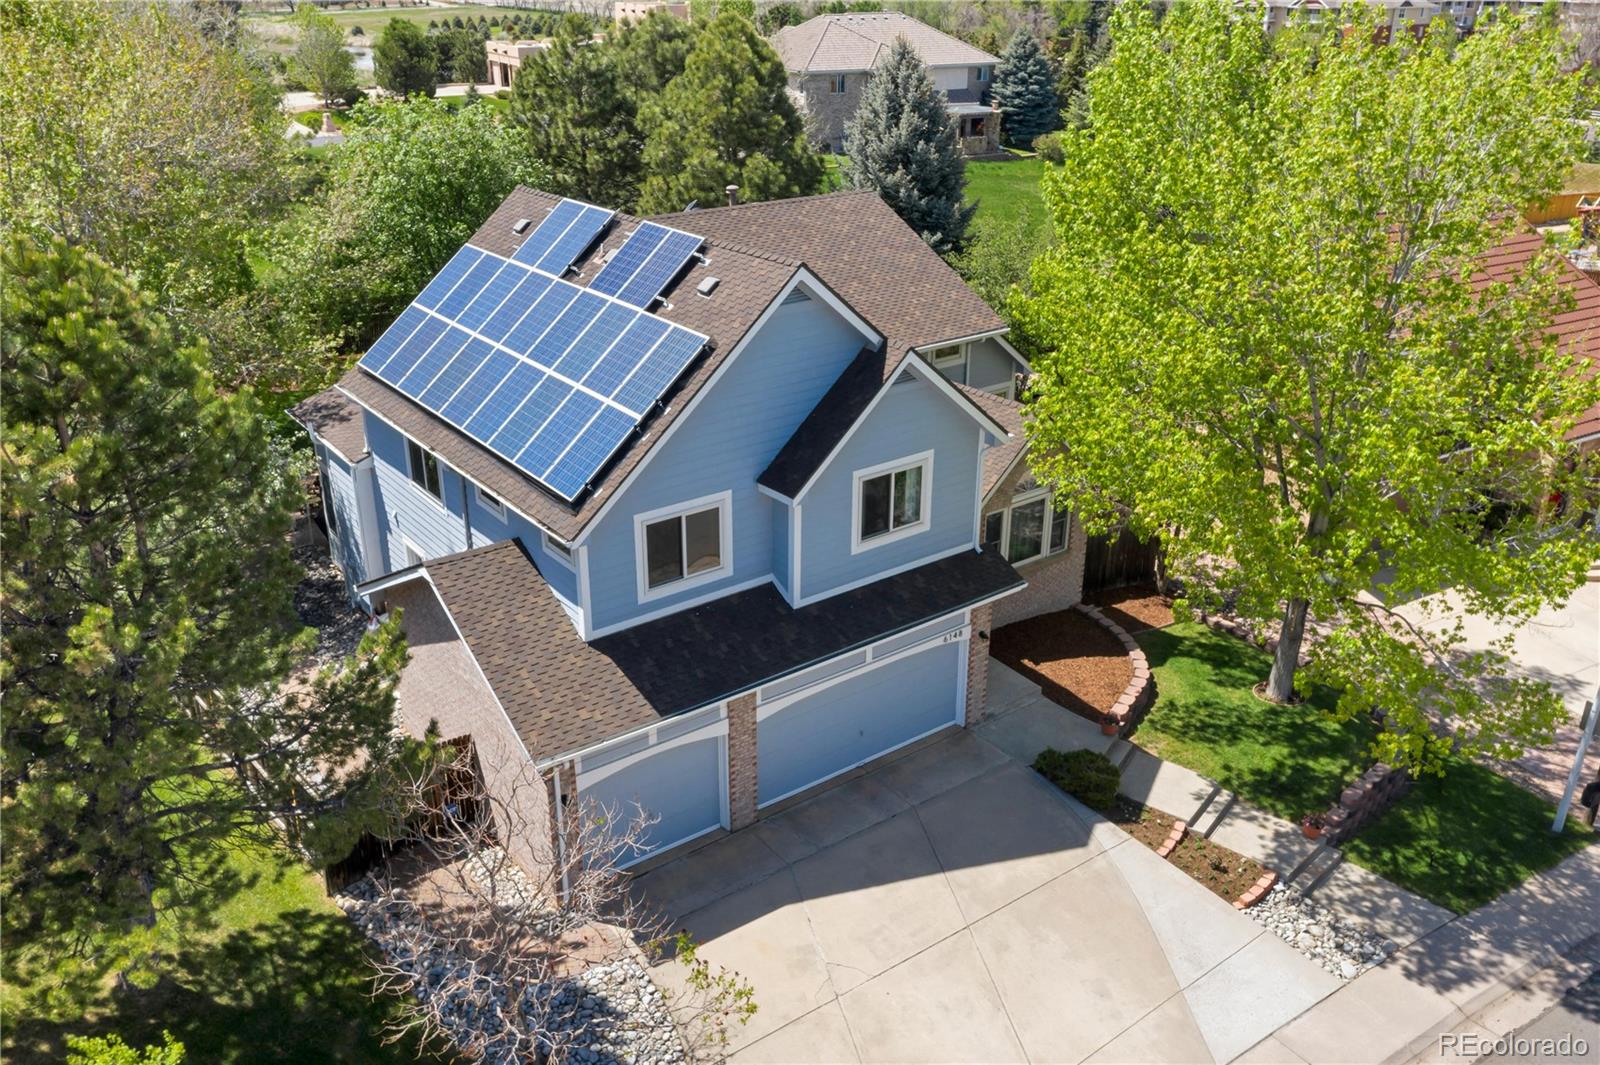 Owned solar panels - electric bill is about $8 a month - Tree lined private backyard!